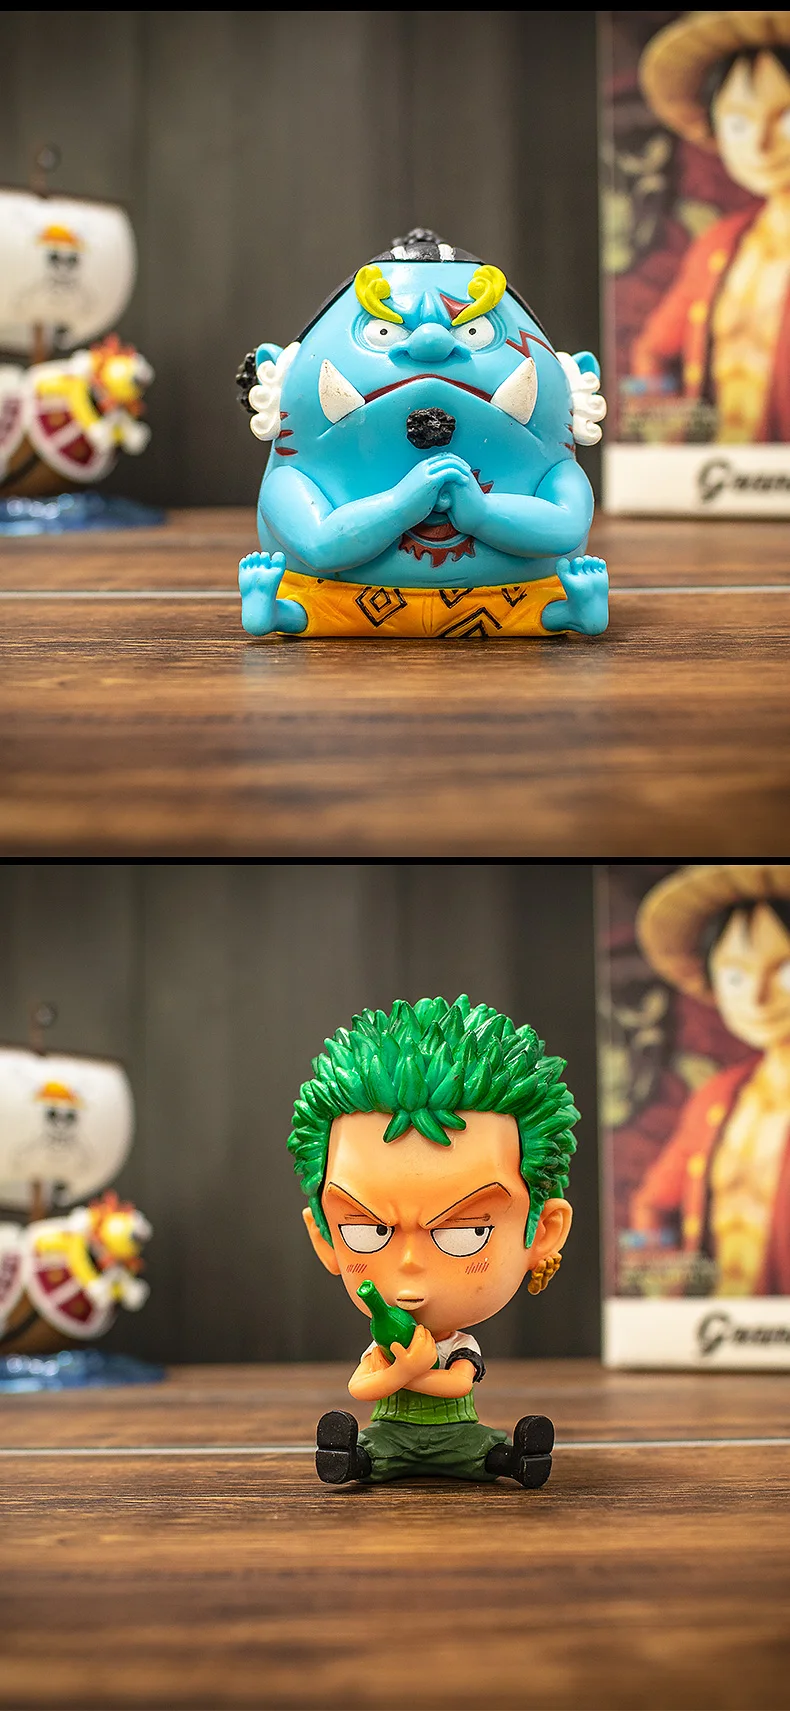 S5a4a58bf980445b48cceaa6c6bea5494S - One Piece Figure